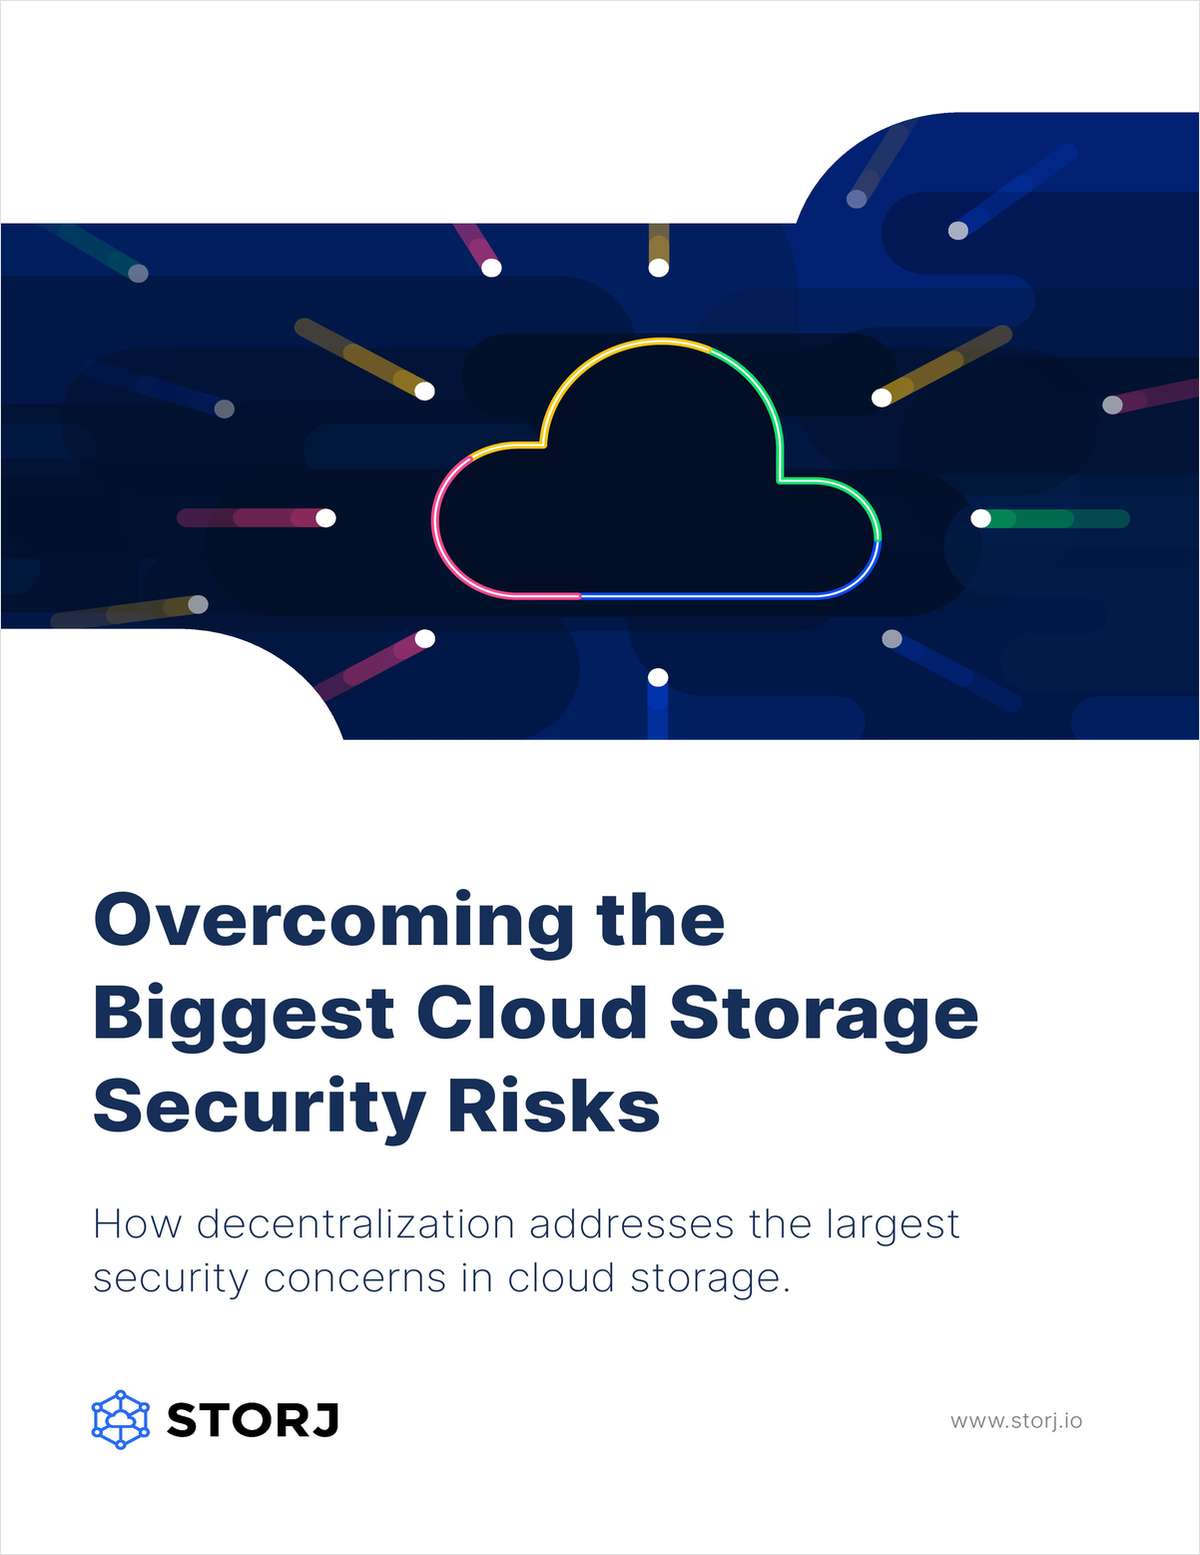 Overcoming the Biggest Cloud Storage Security Risks